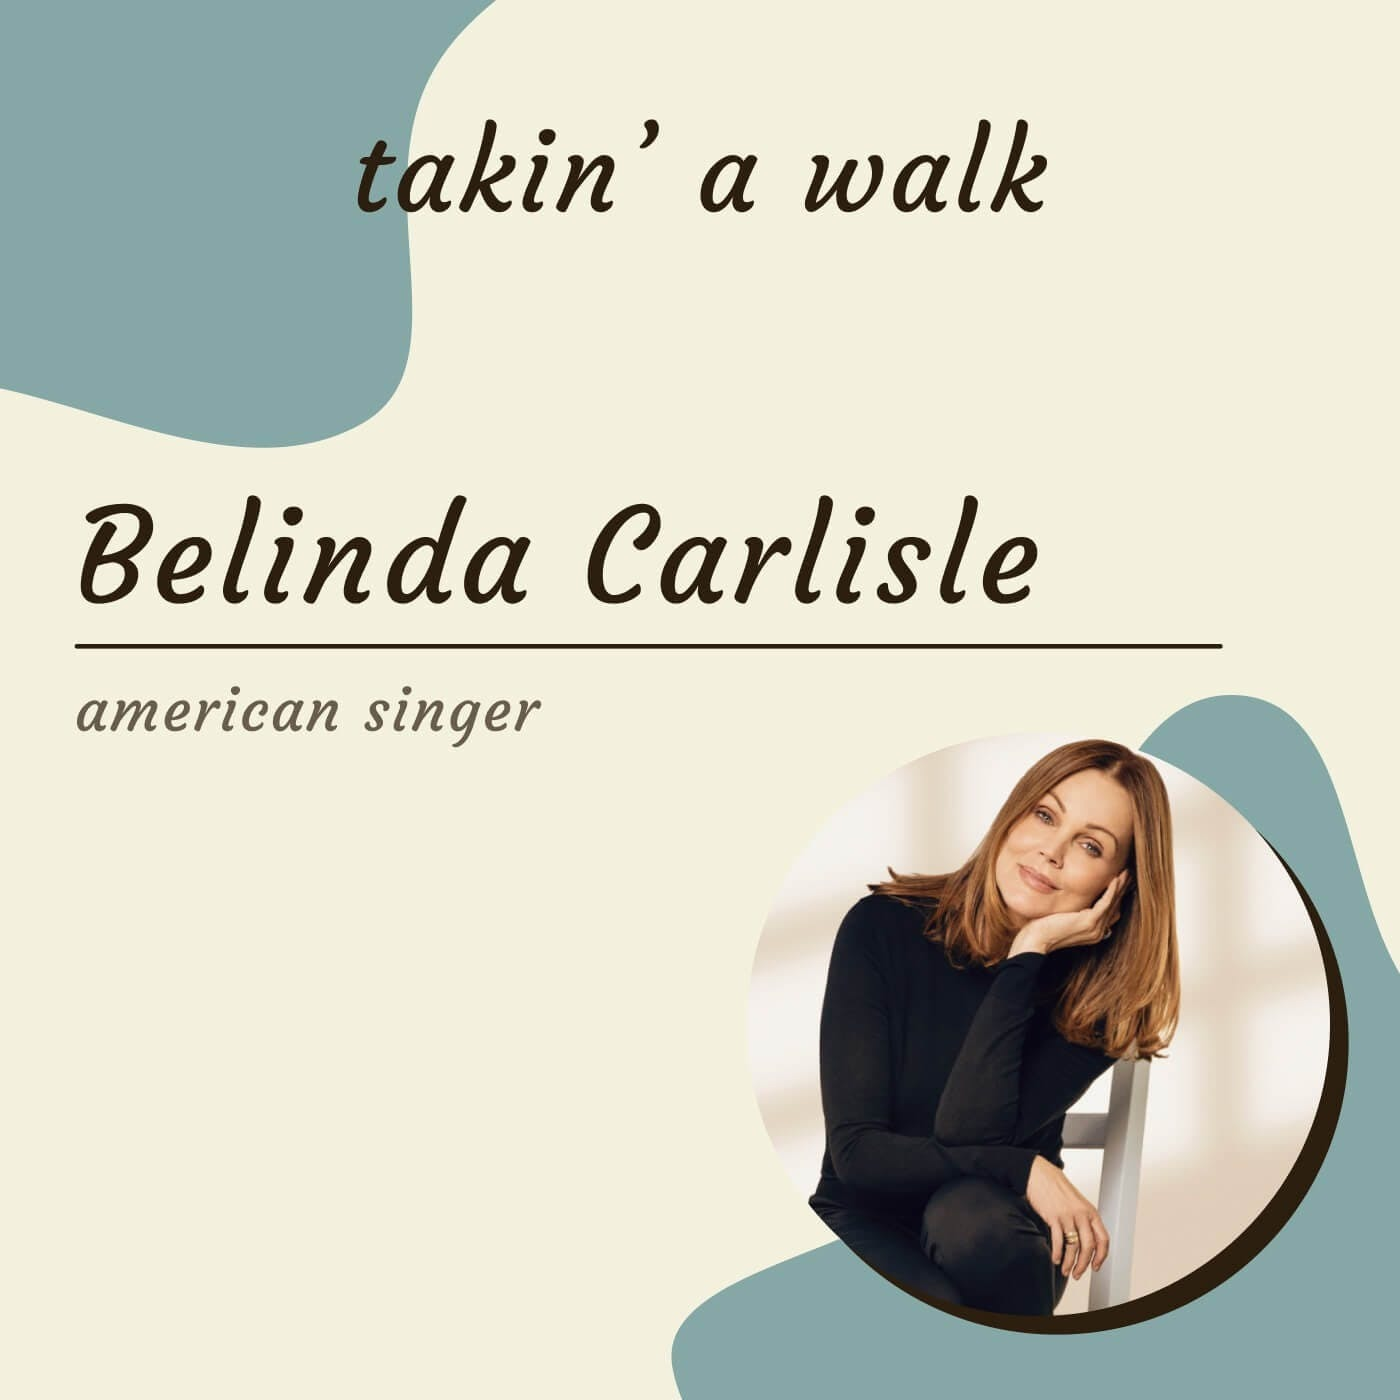 Belinda Carlisle: An iconic singer and her love of music